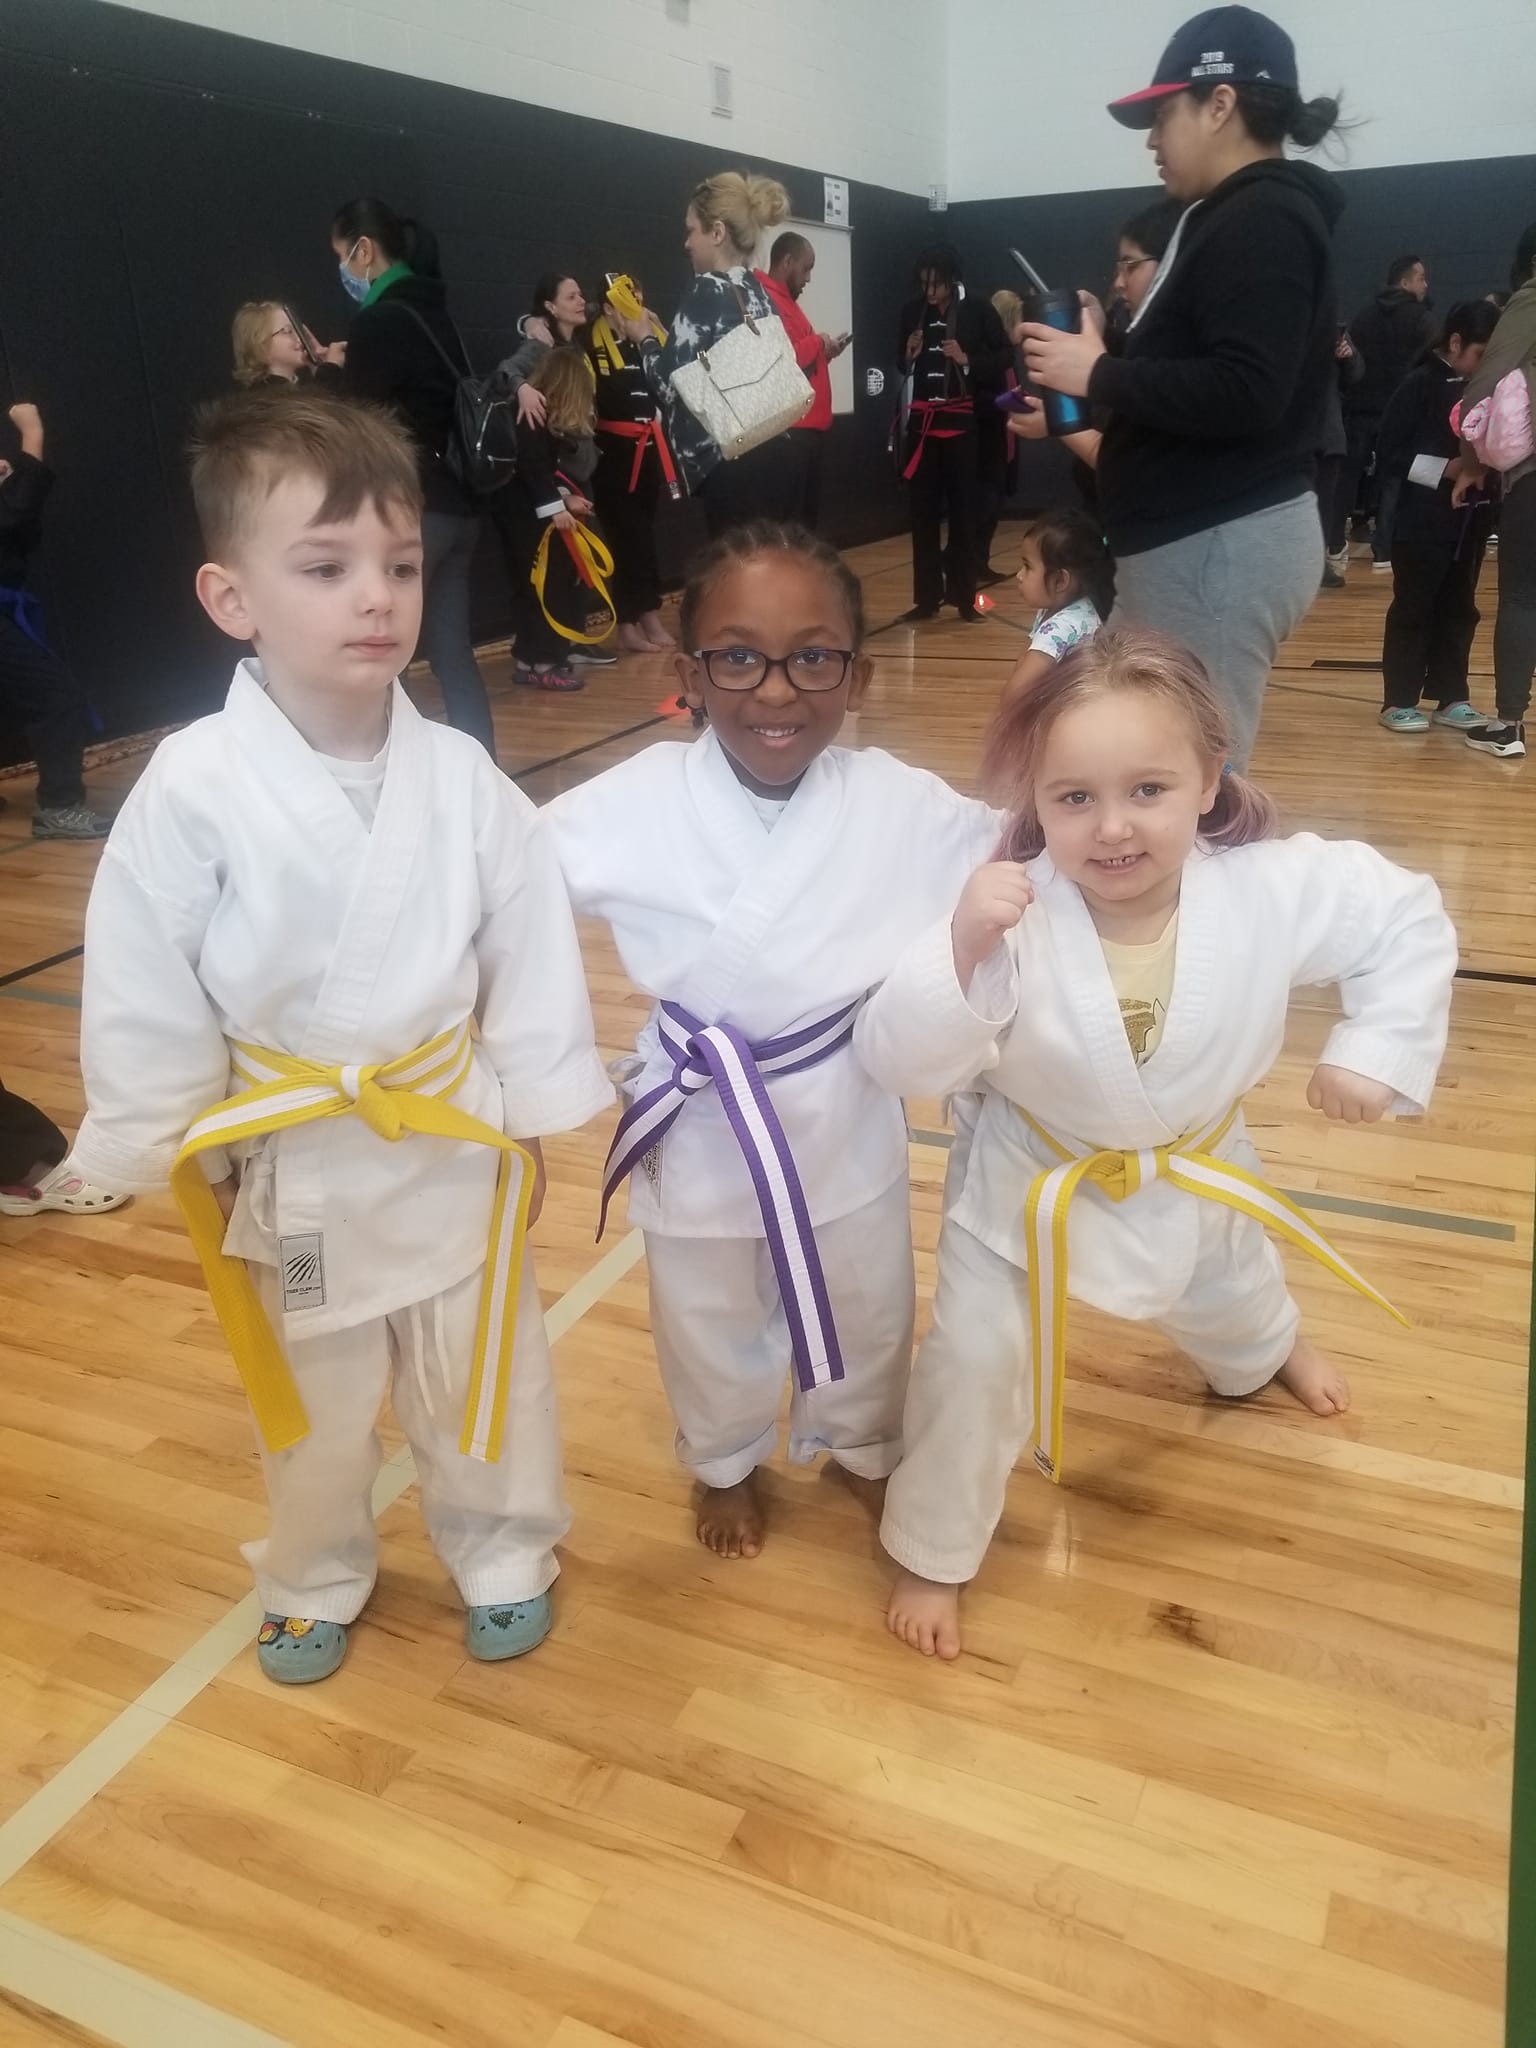 academy of kempo martial arts kids building confidence and focus through training.